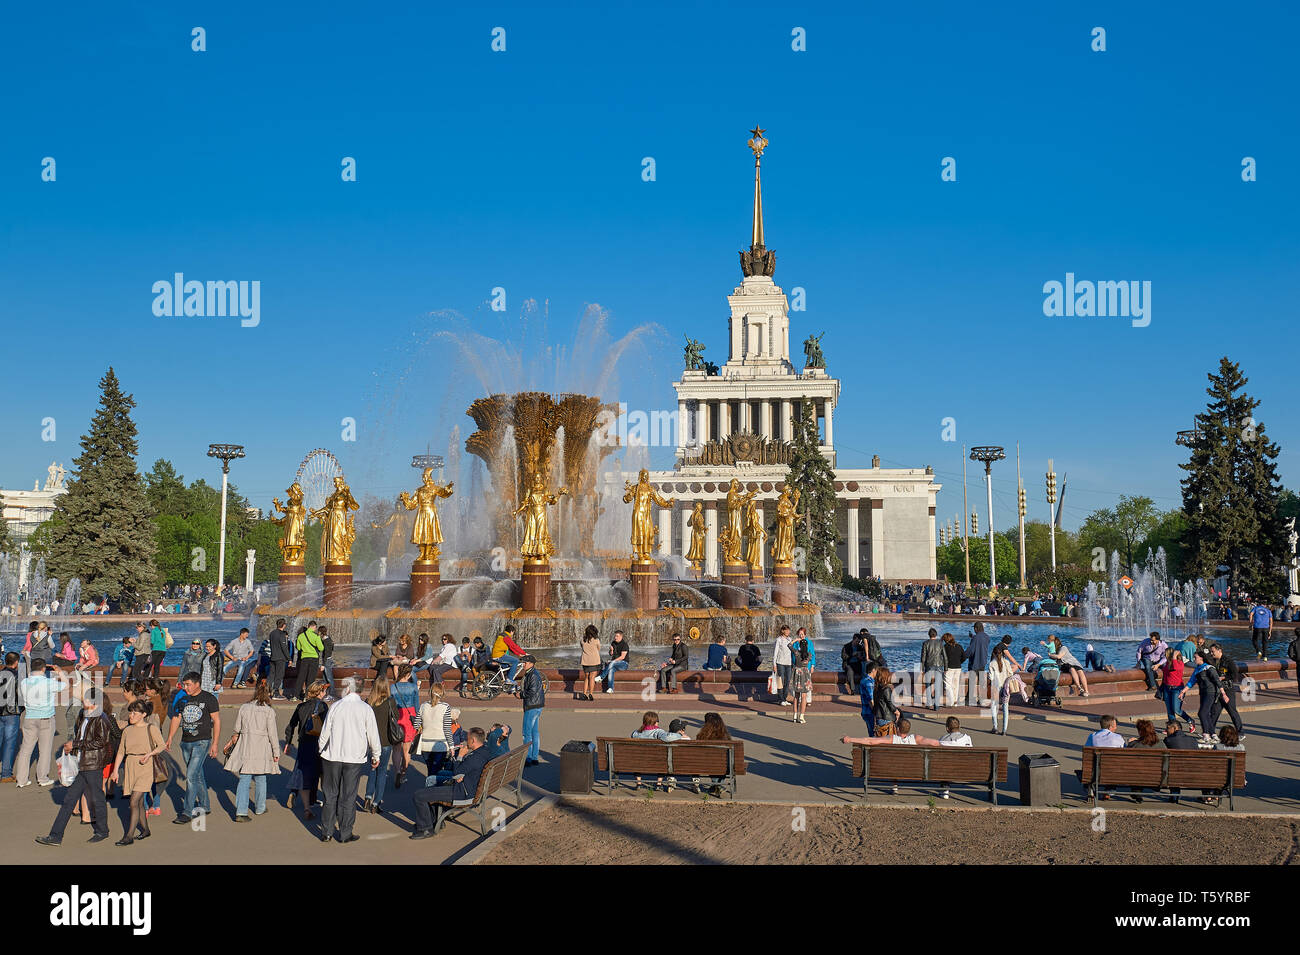 Moscow, Russia - May 9, 2014: People are resting near the fountain Friendship of Peoples on the All-Russian Exhibition Center (VDNH) Stock Photo